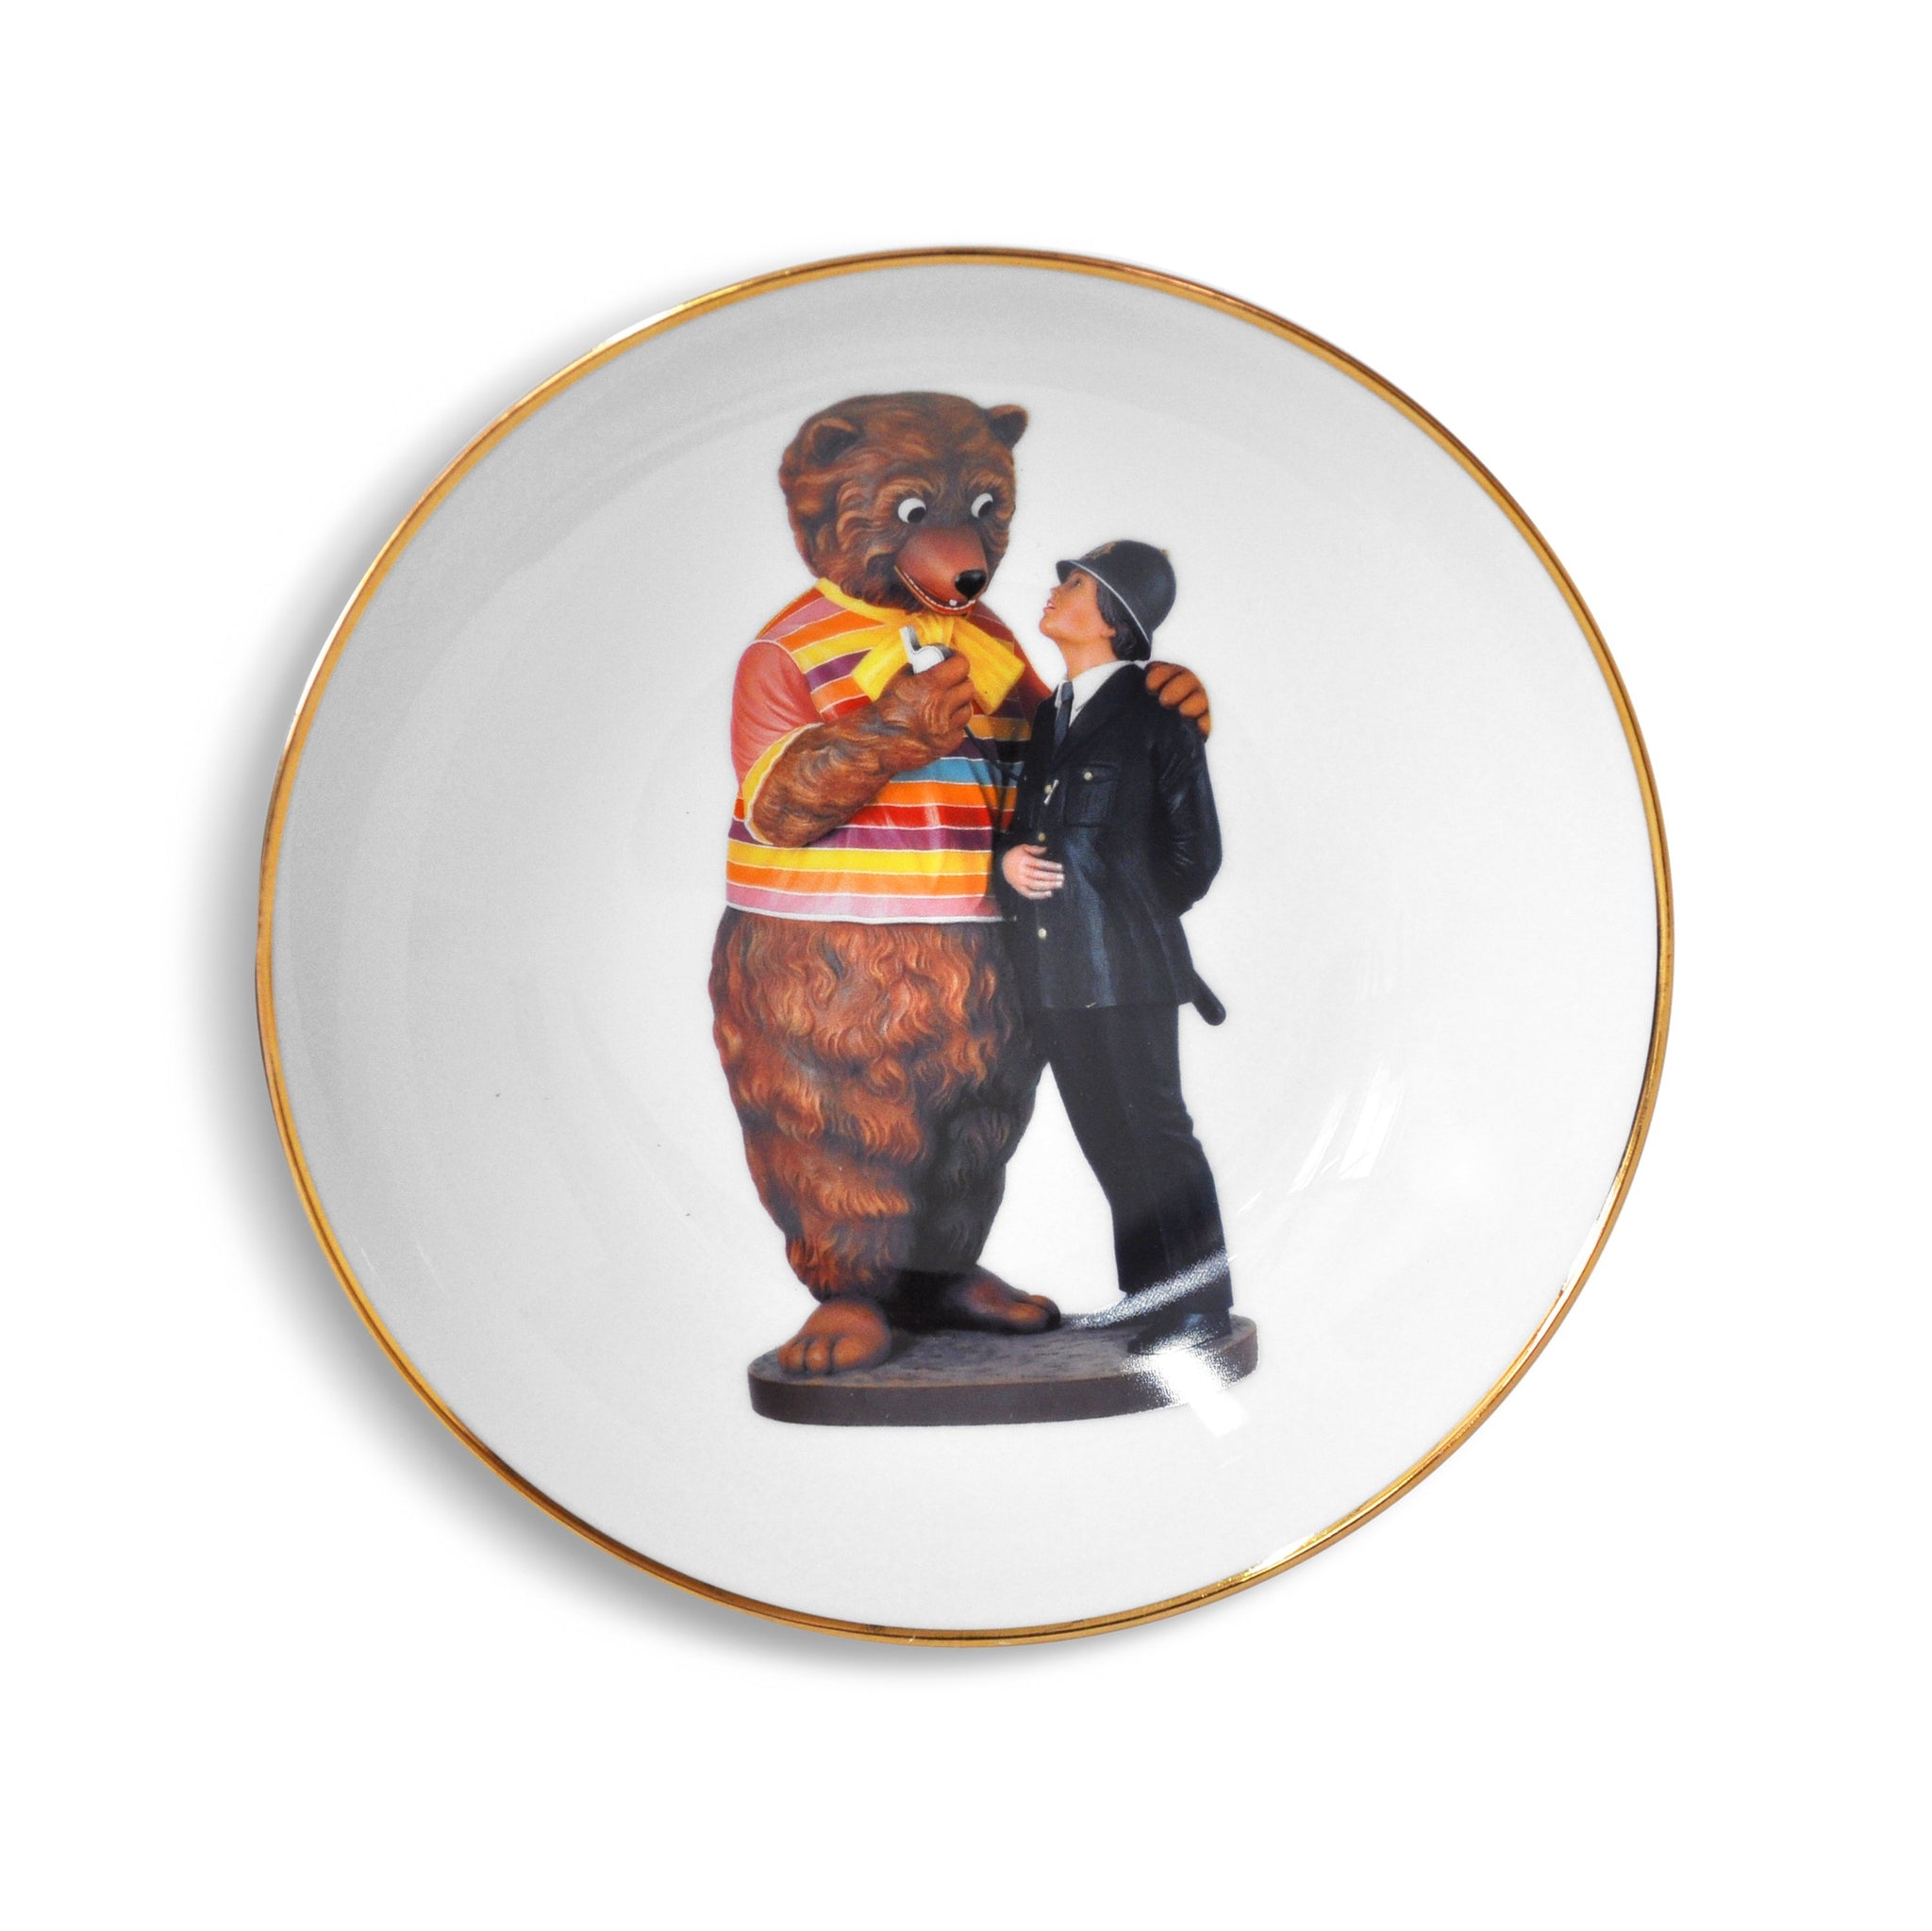 Jeff Koons: Banality Series Bread and Butter Plate